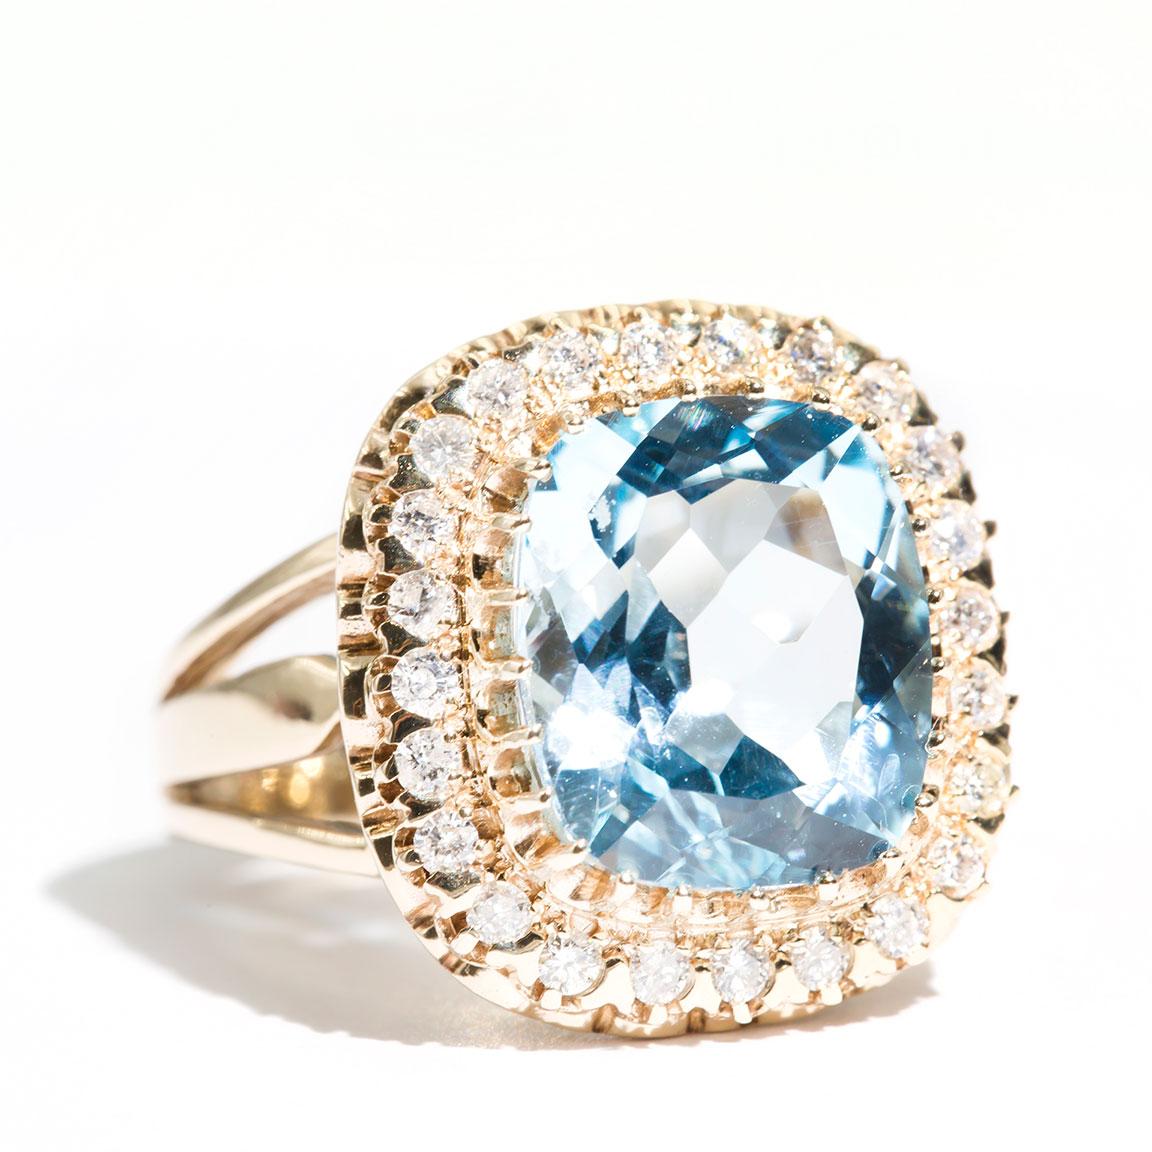 Crafted in 9 carat yellow gold, this unique vintage inspired cocktail ring features a lovely bright blue cushion cut Topaz encompassed by a halo of sparking round brilliant cut diamonds. We have named this vintage splendour The Elizabeth Ring. The